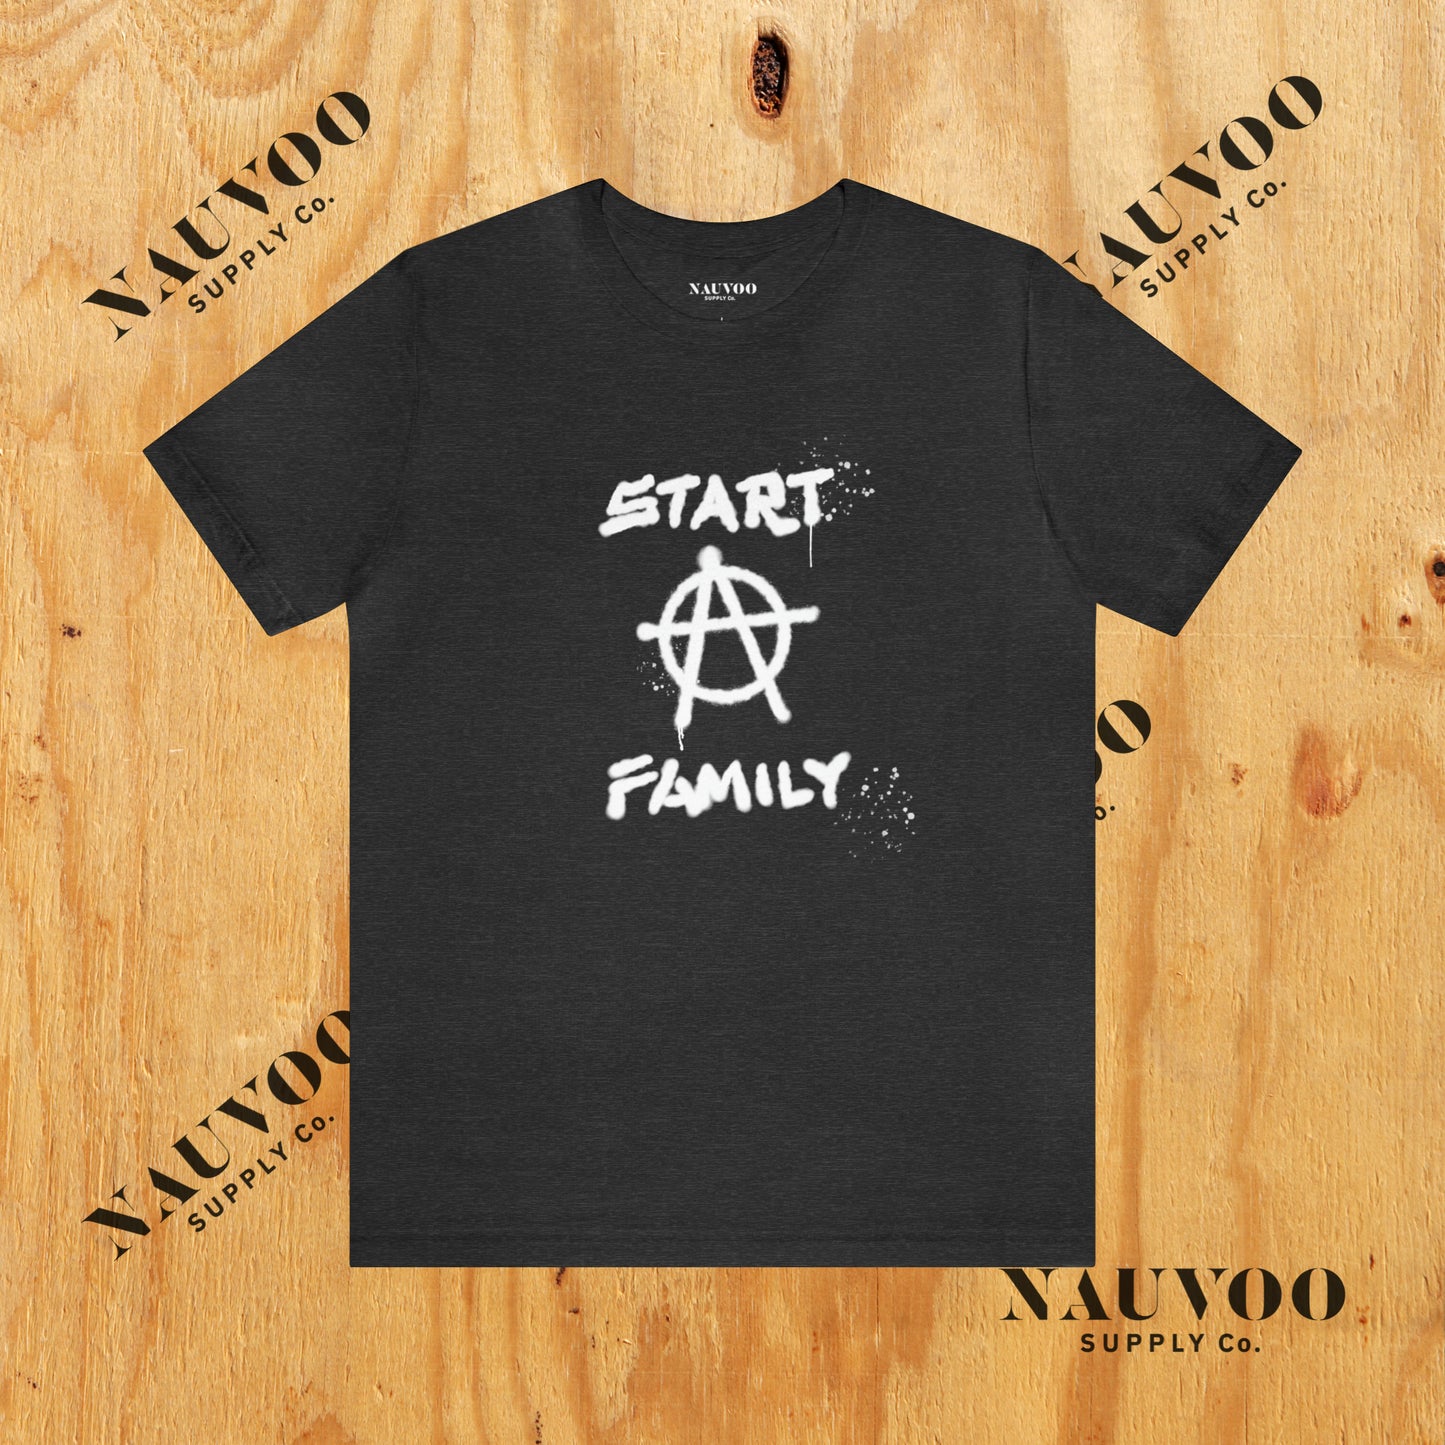 Start A Family - Funny Anarchy Shirt